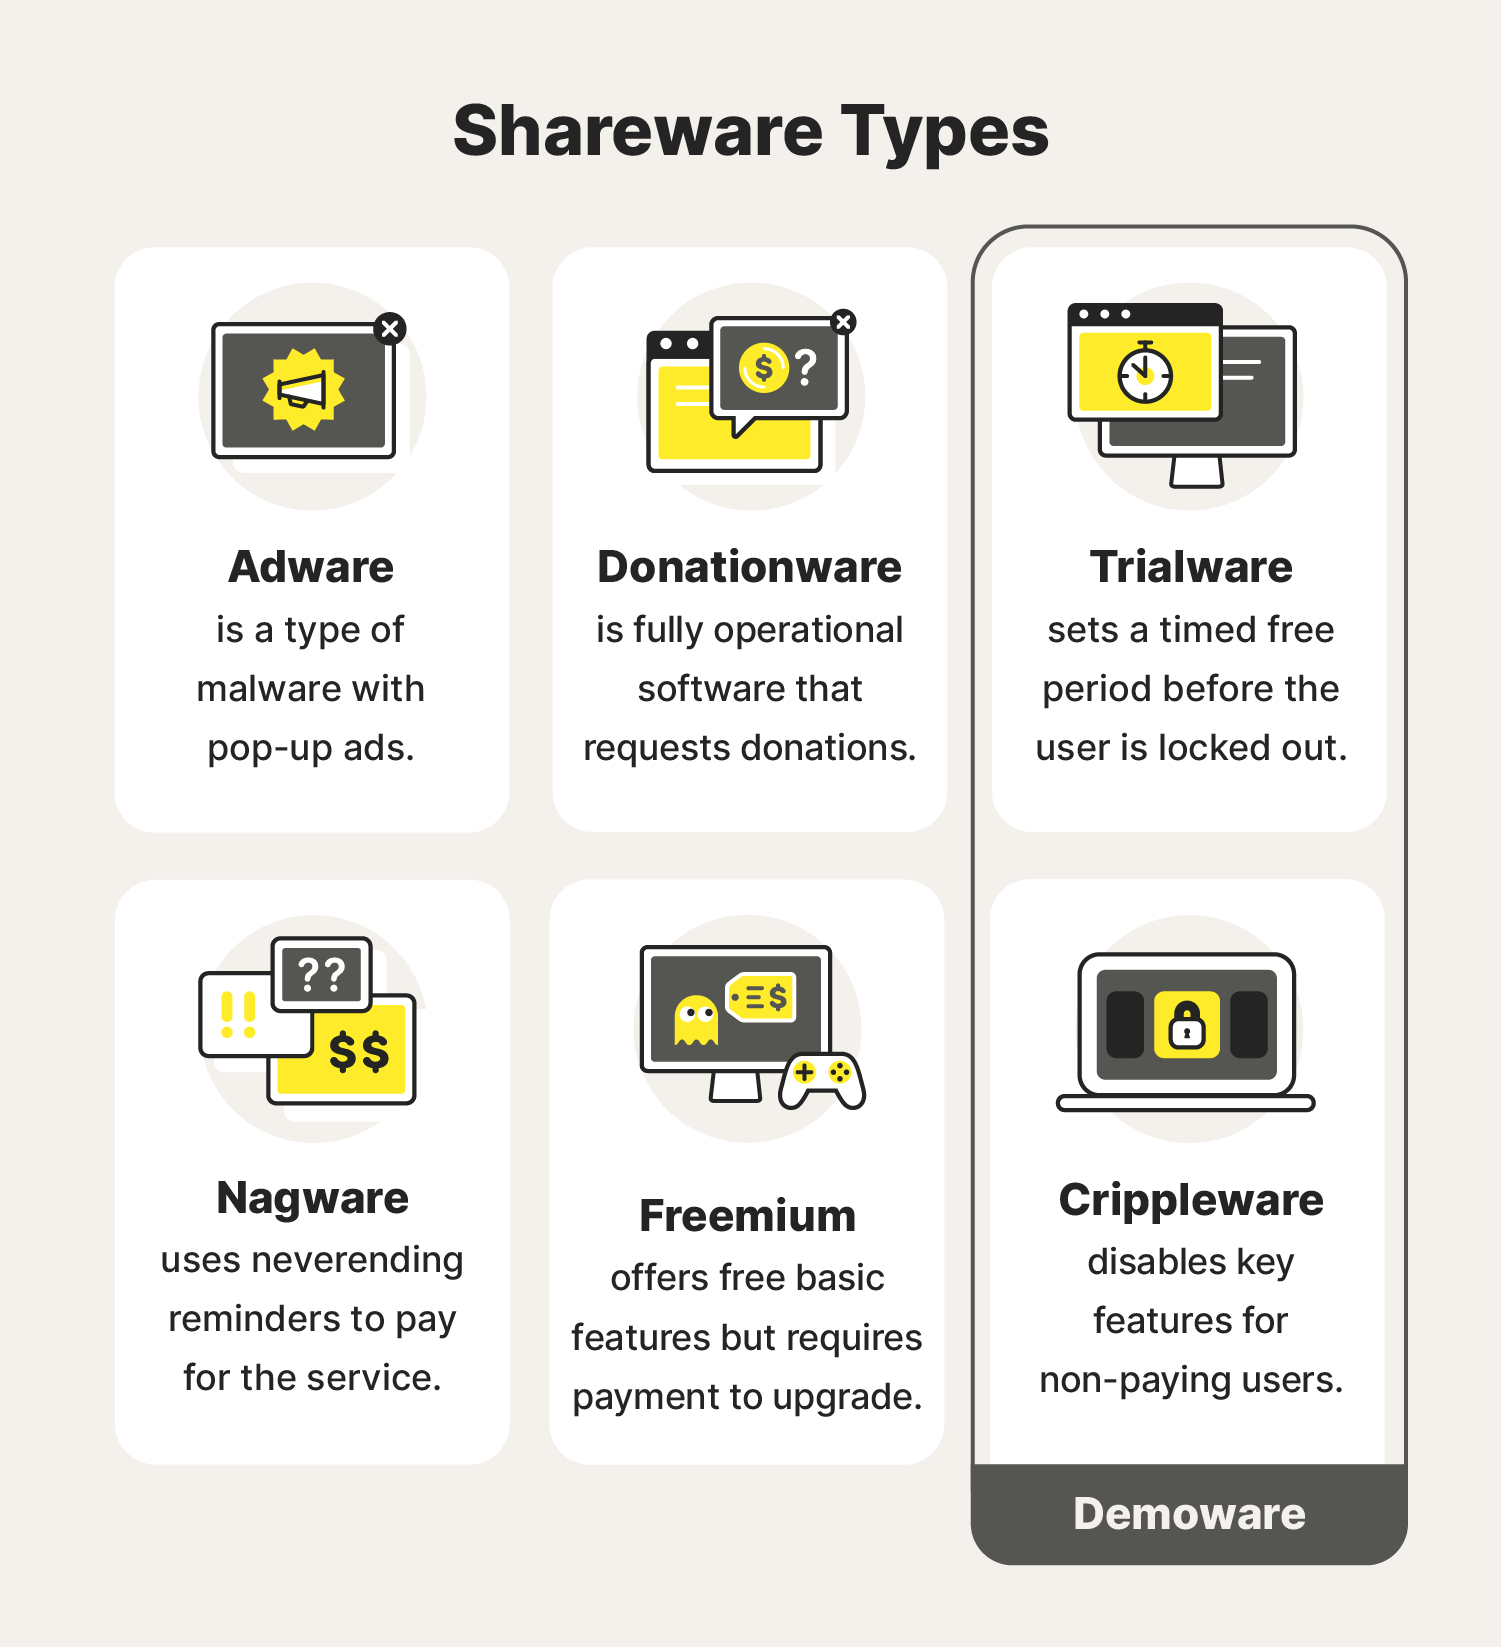 Six illustrations and explanations highlight the different types of shareware, including adware, donationware, trialware, nagware, freemium, and crippleware. 